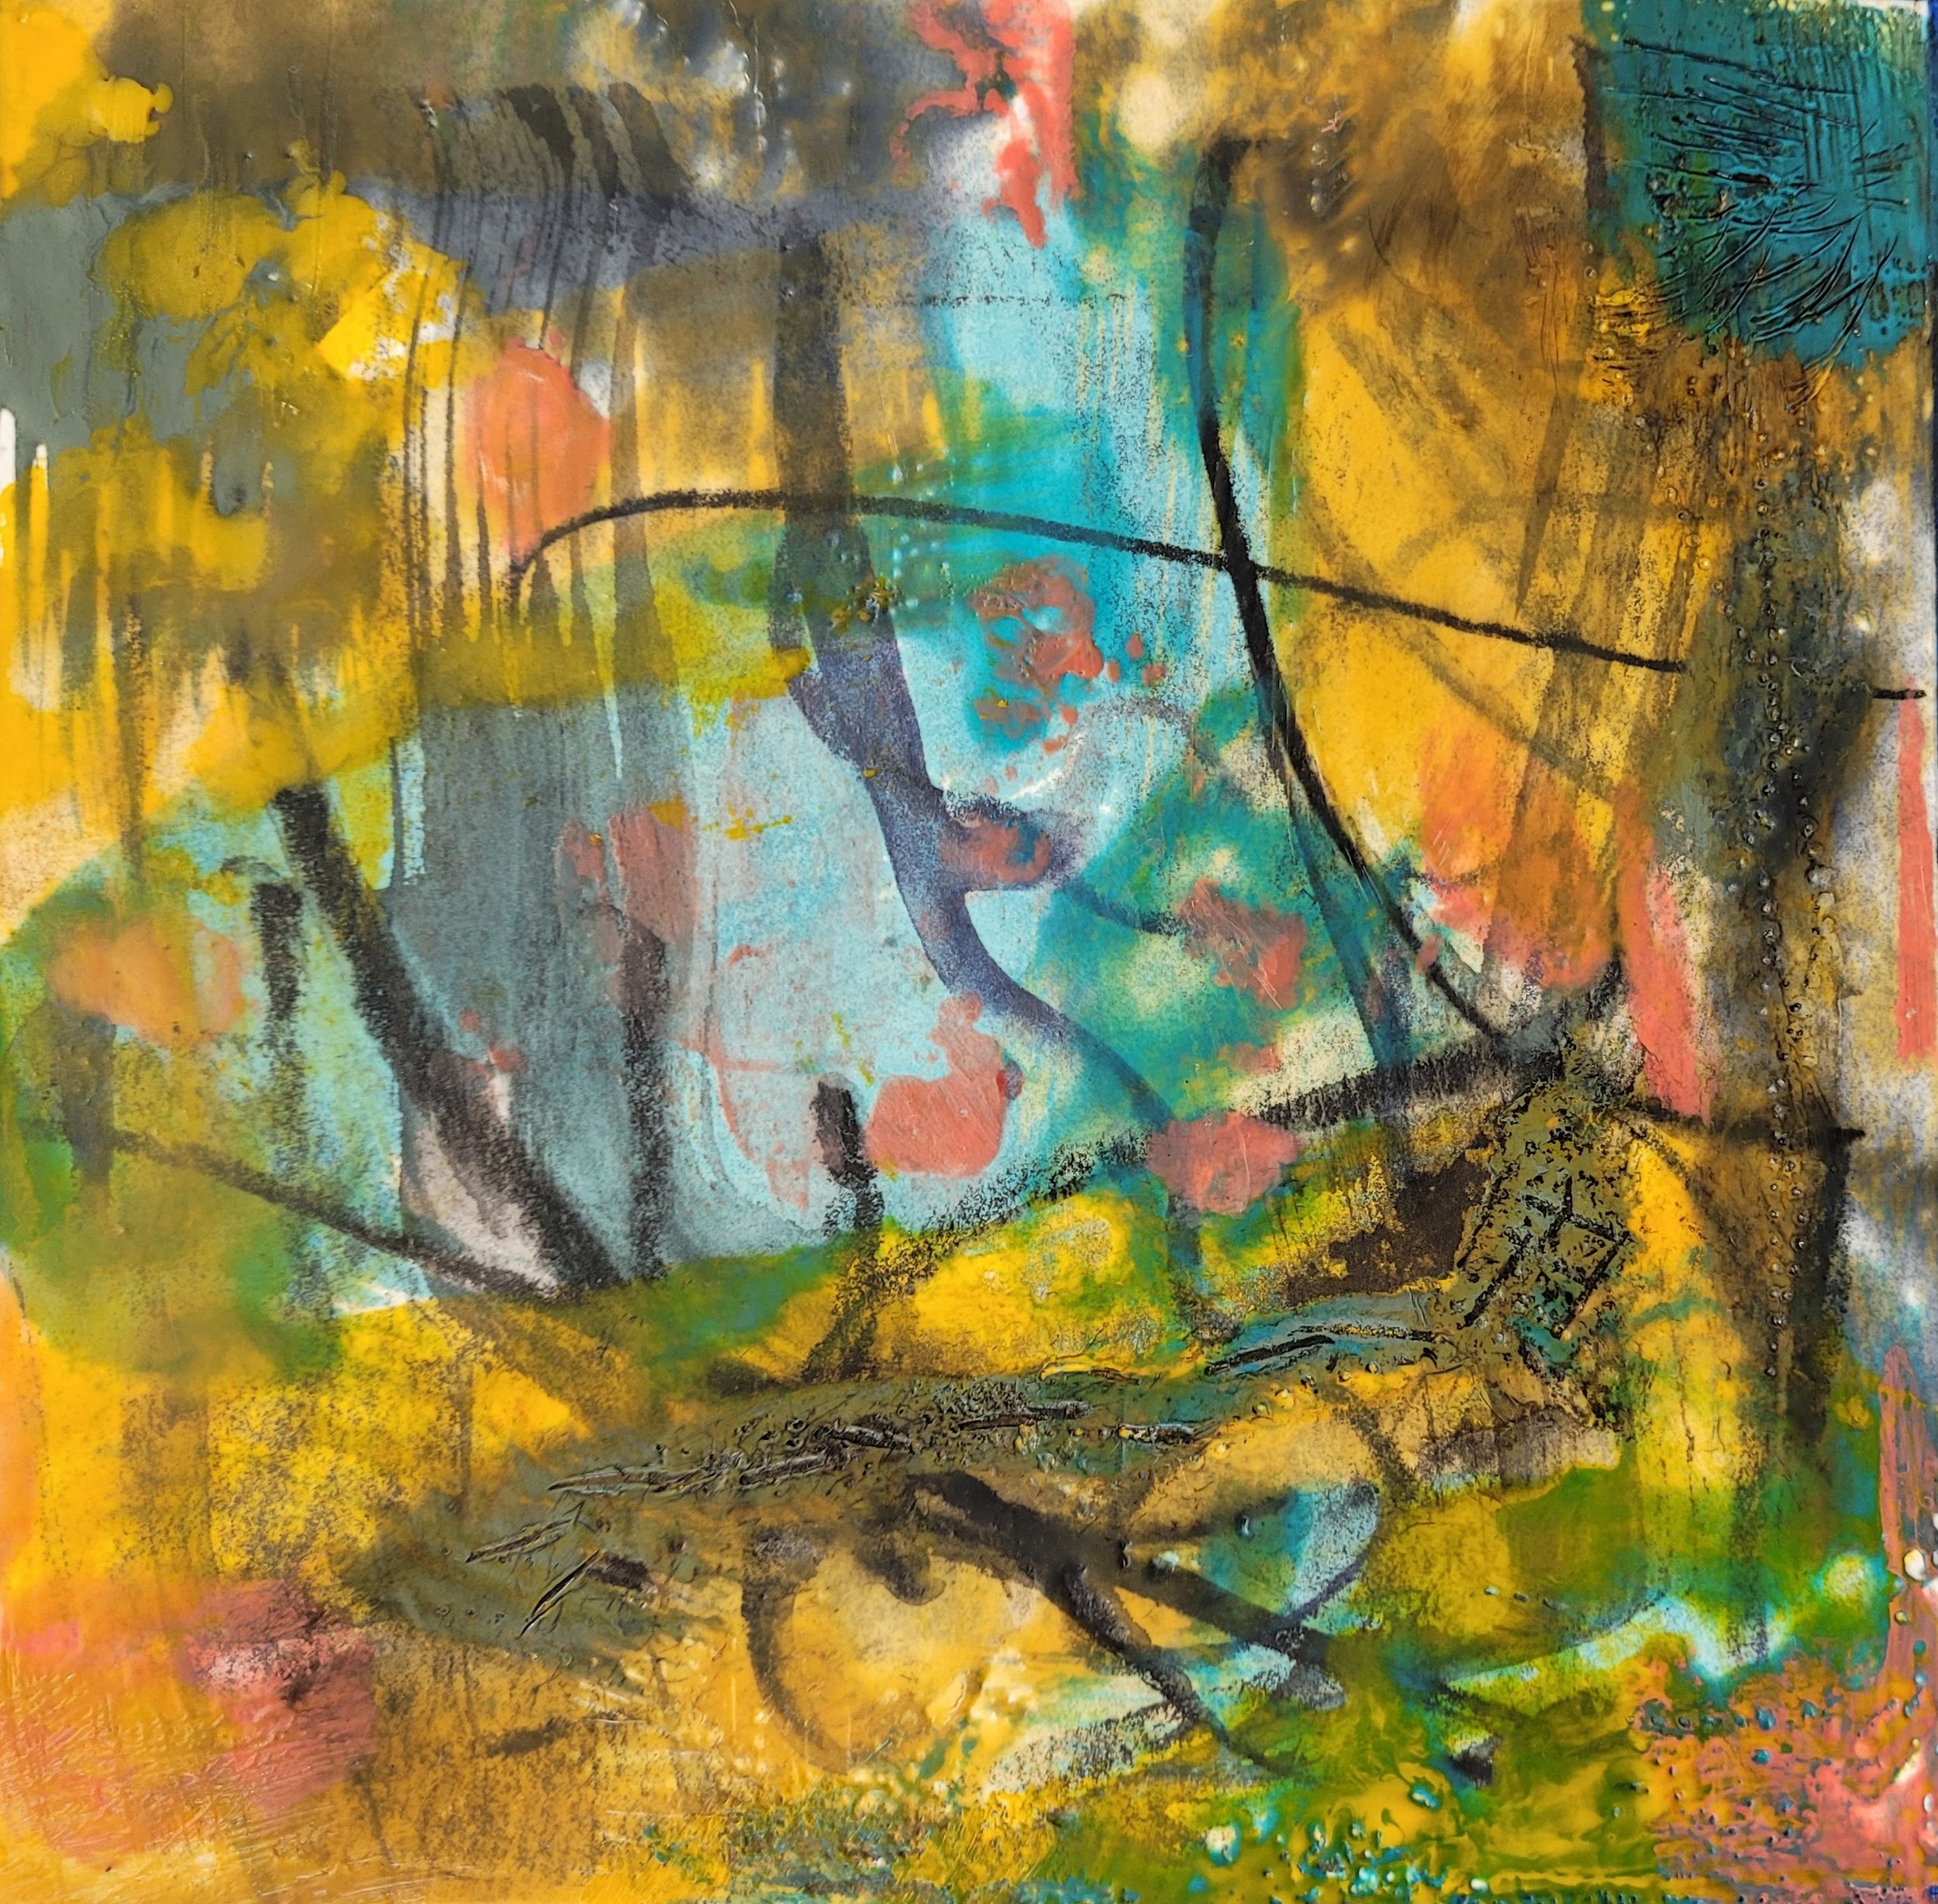   Early Autumn II , encaustic on paper, 6 x 6 in. 